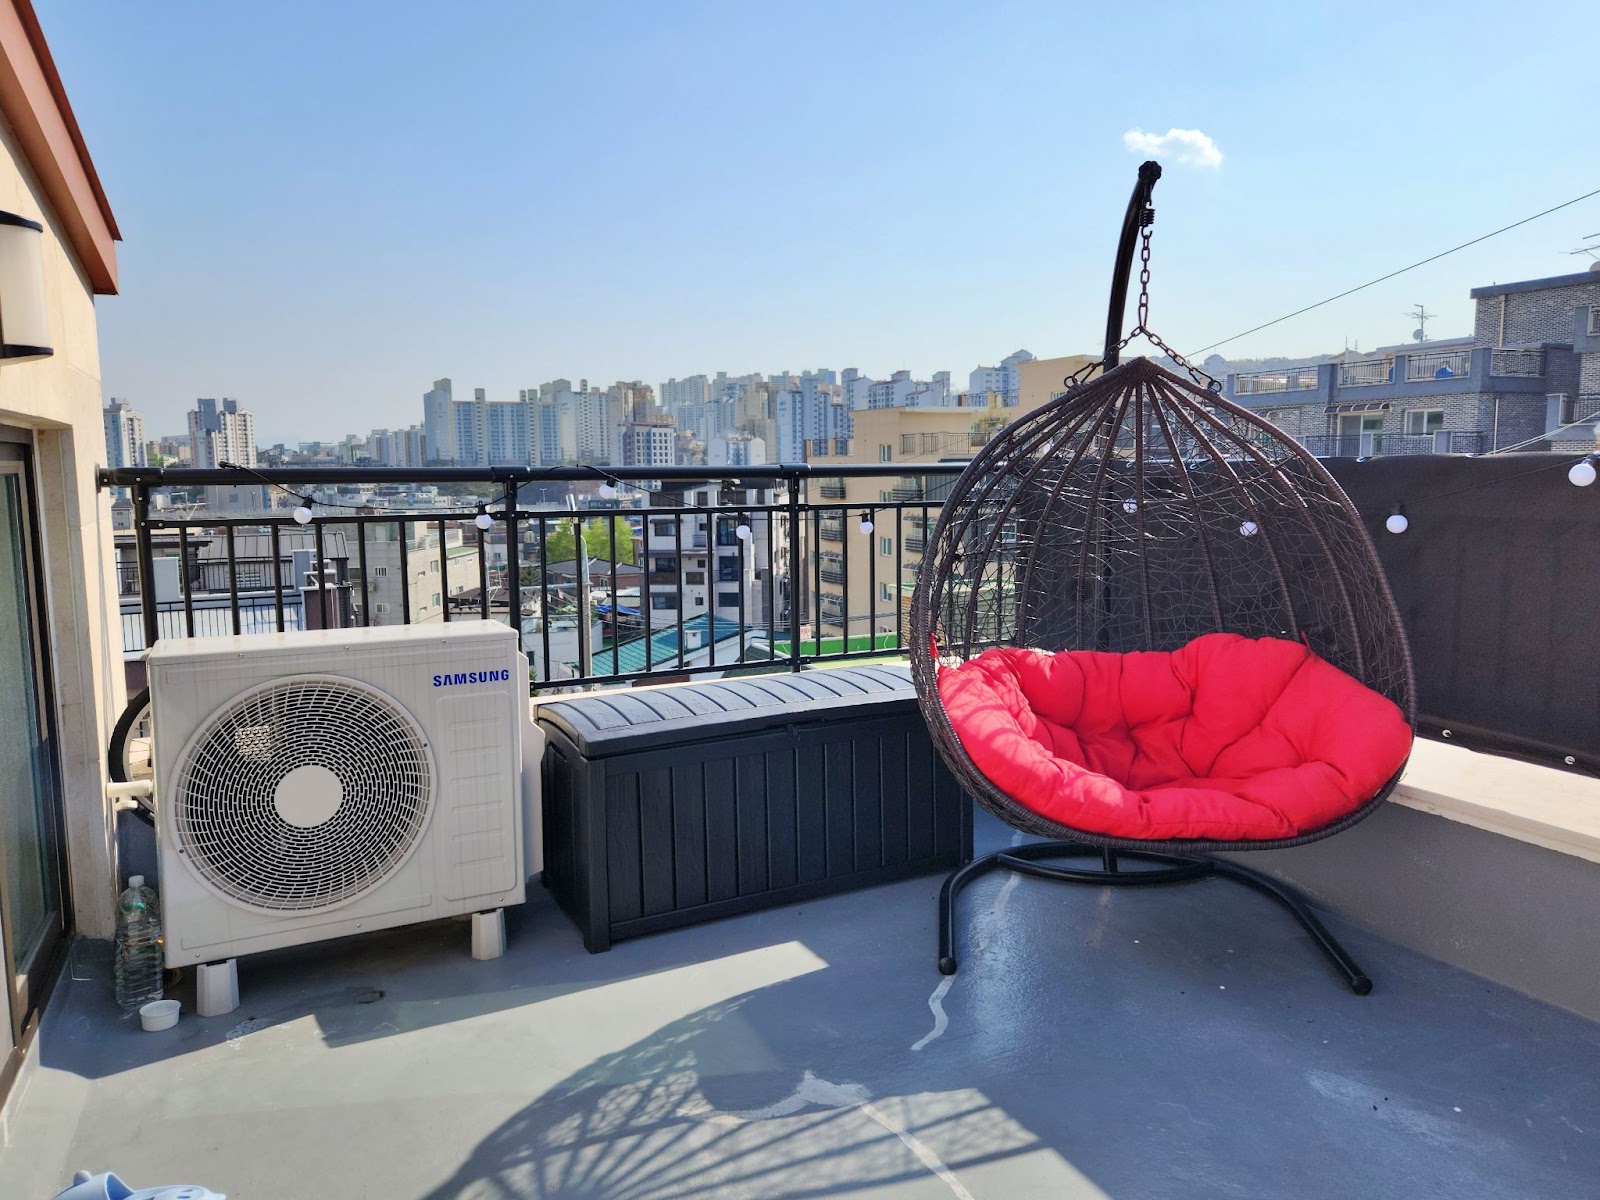 My rooftop area with a handing bamboo chair with red cushions, with the Seoul cityscape in the background.